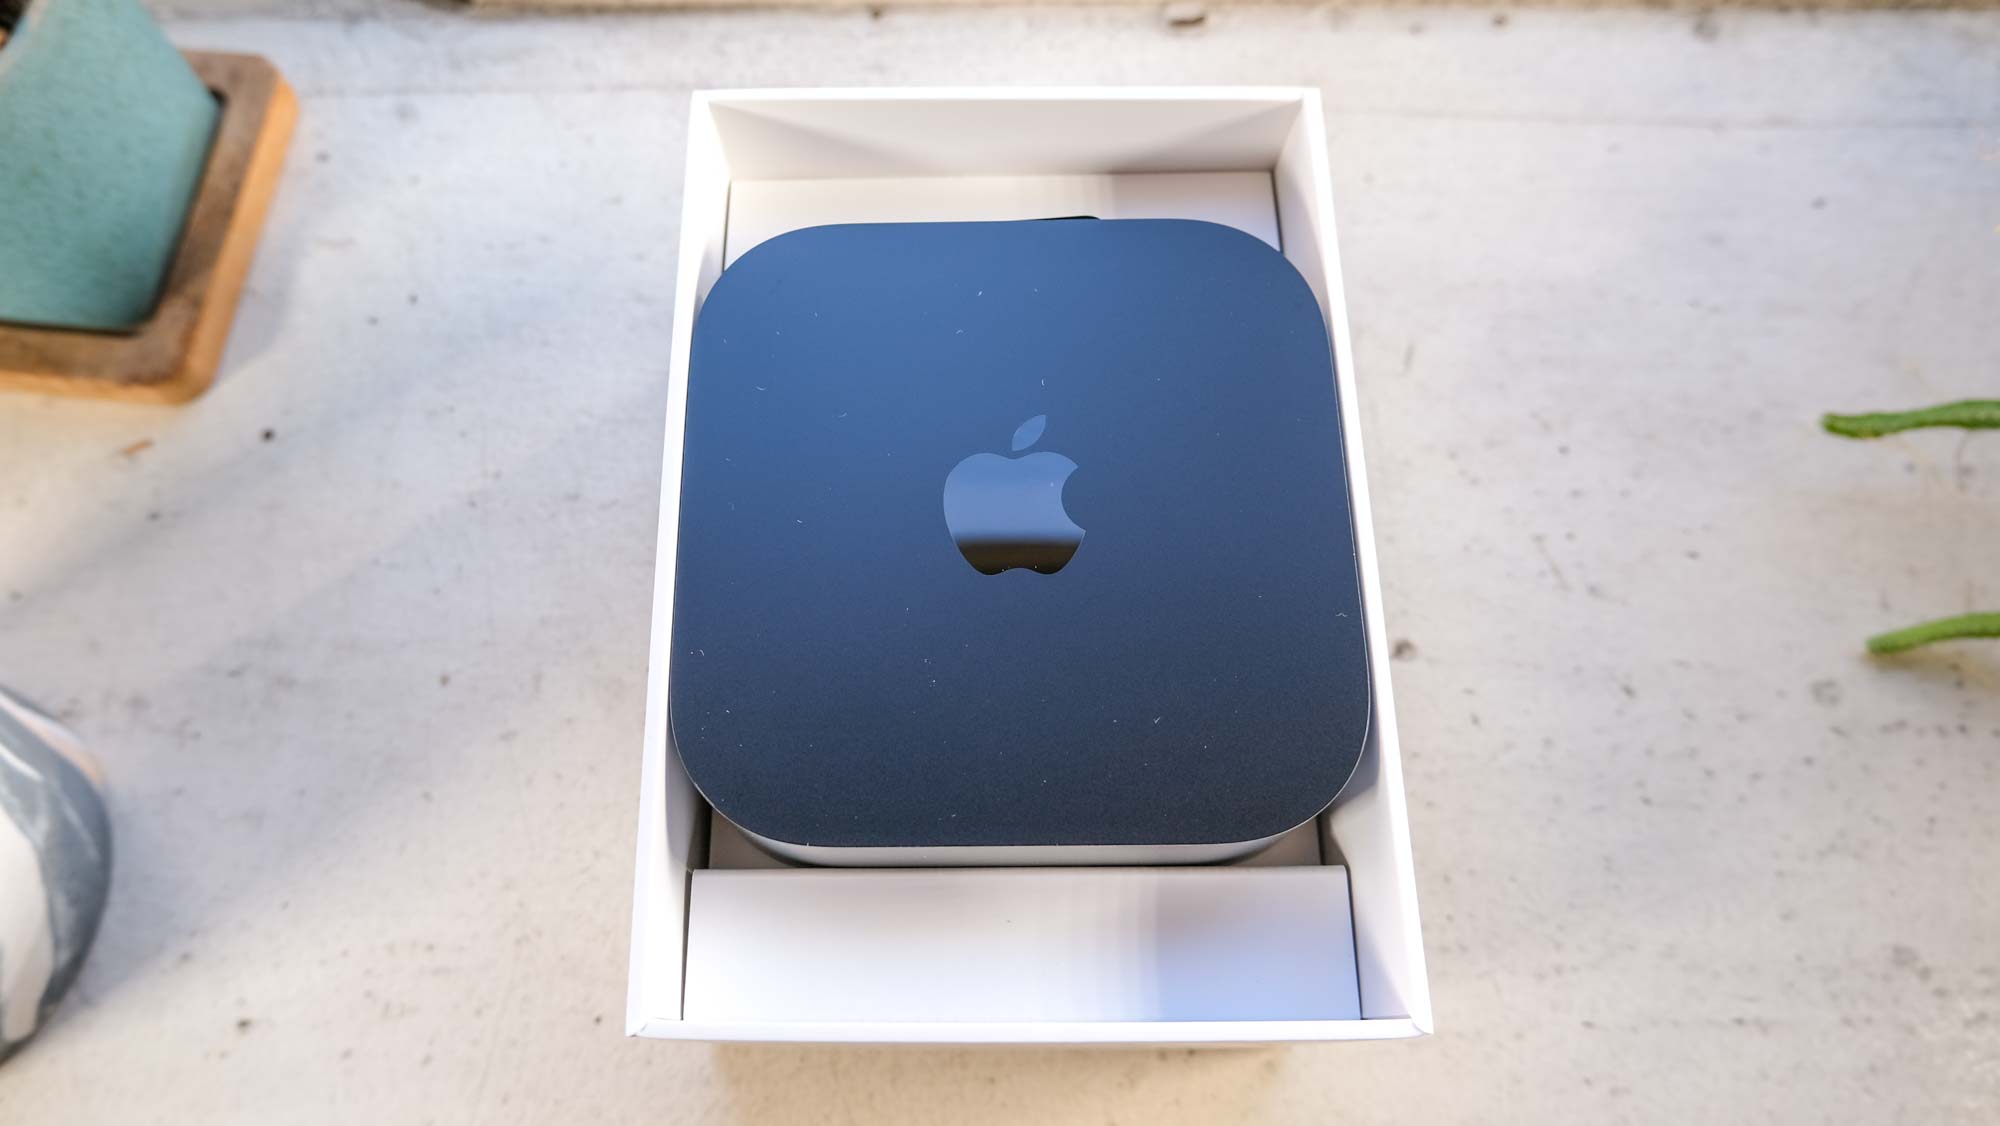 The Apple TV 4K (2022) in its box